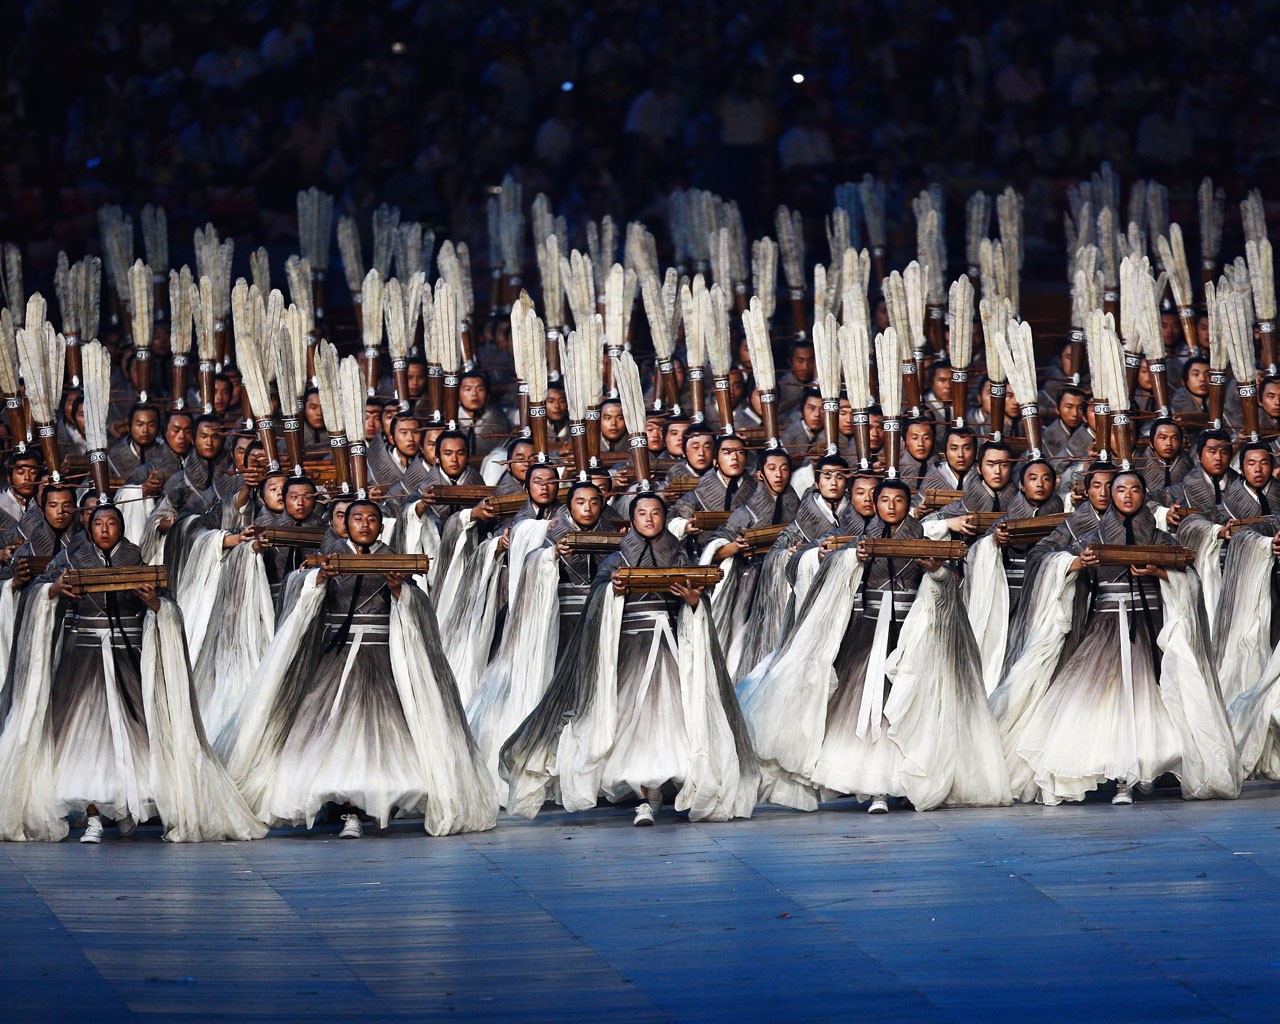 2008 Beijing Olympic Games Opening Ceremony Wallpapers #5 - 1280x1024